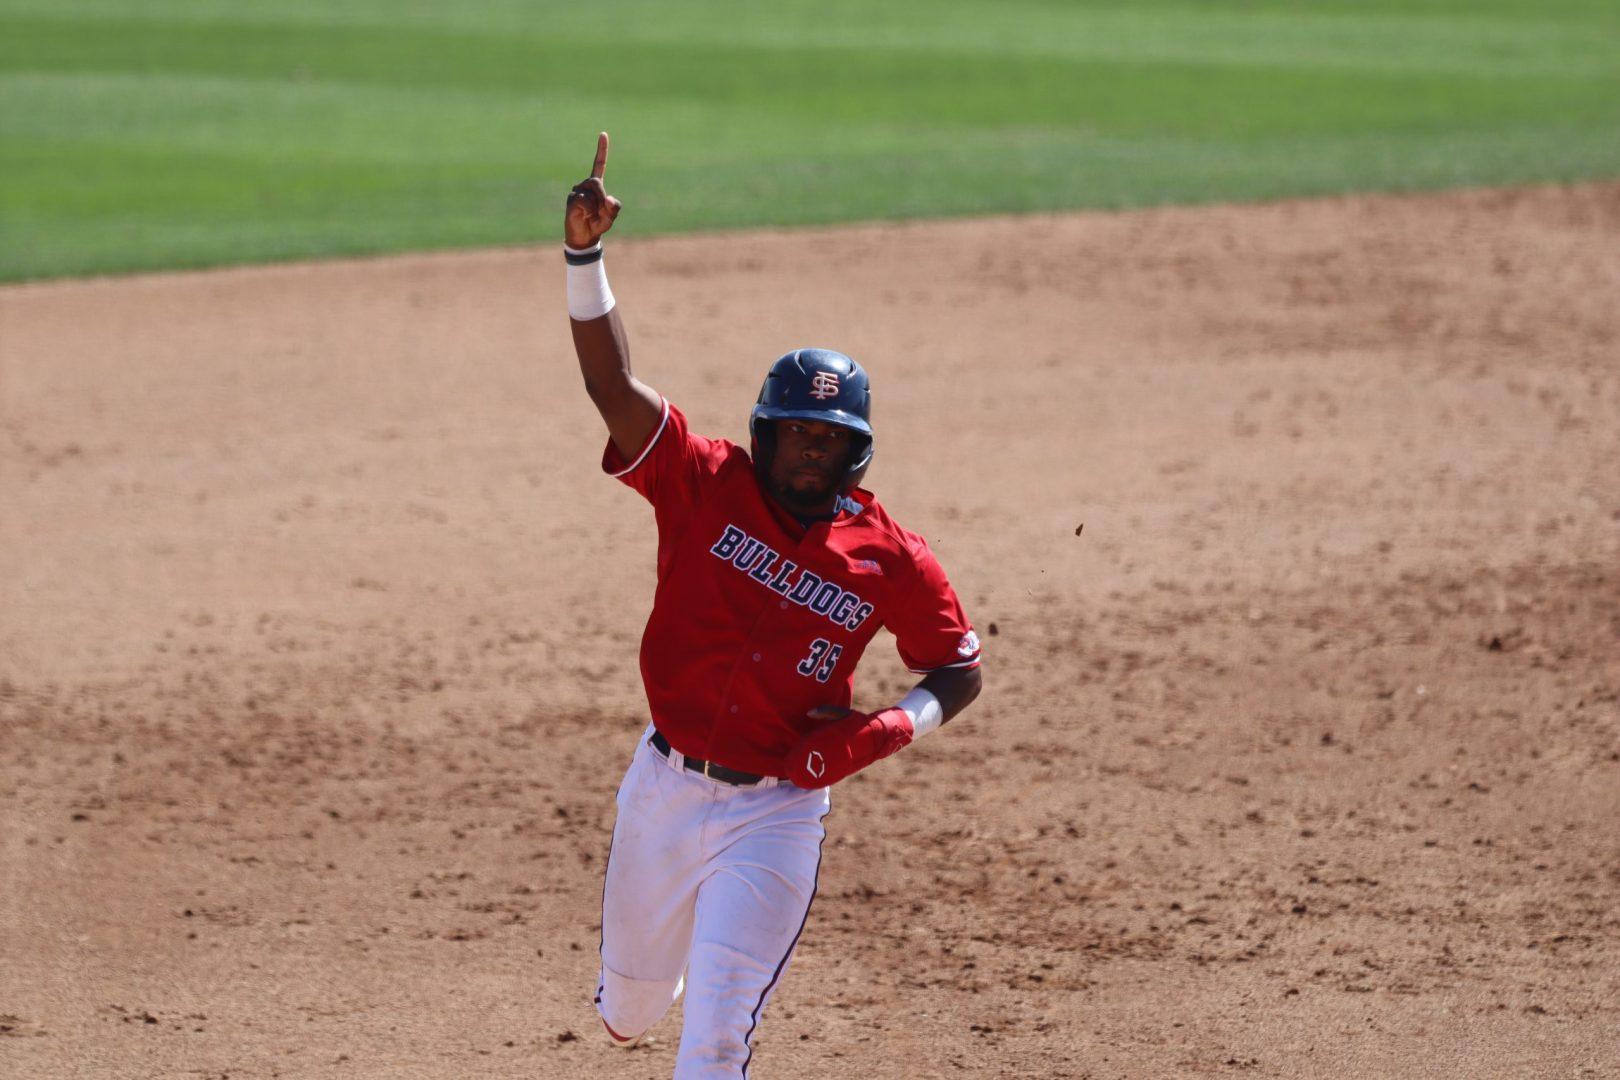 Fresno State outfielder E.J. Andrews Jr. runs the bases in the sixth inning on April 10, 2021, at Bob Bennett Stadium. (Kameron Thorn/The Collegian)